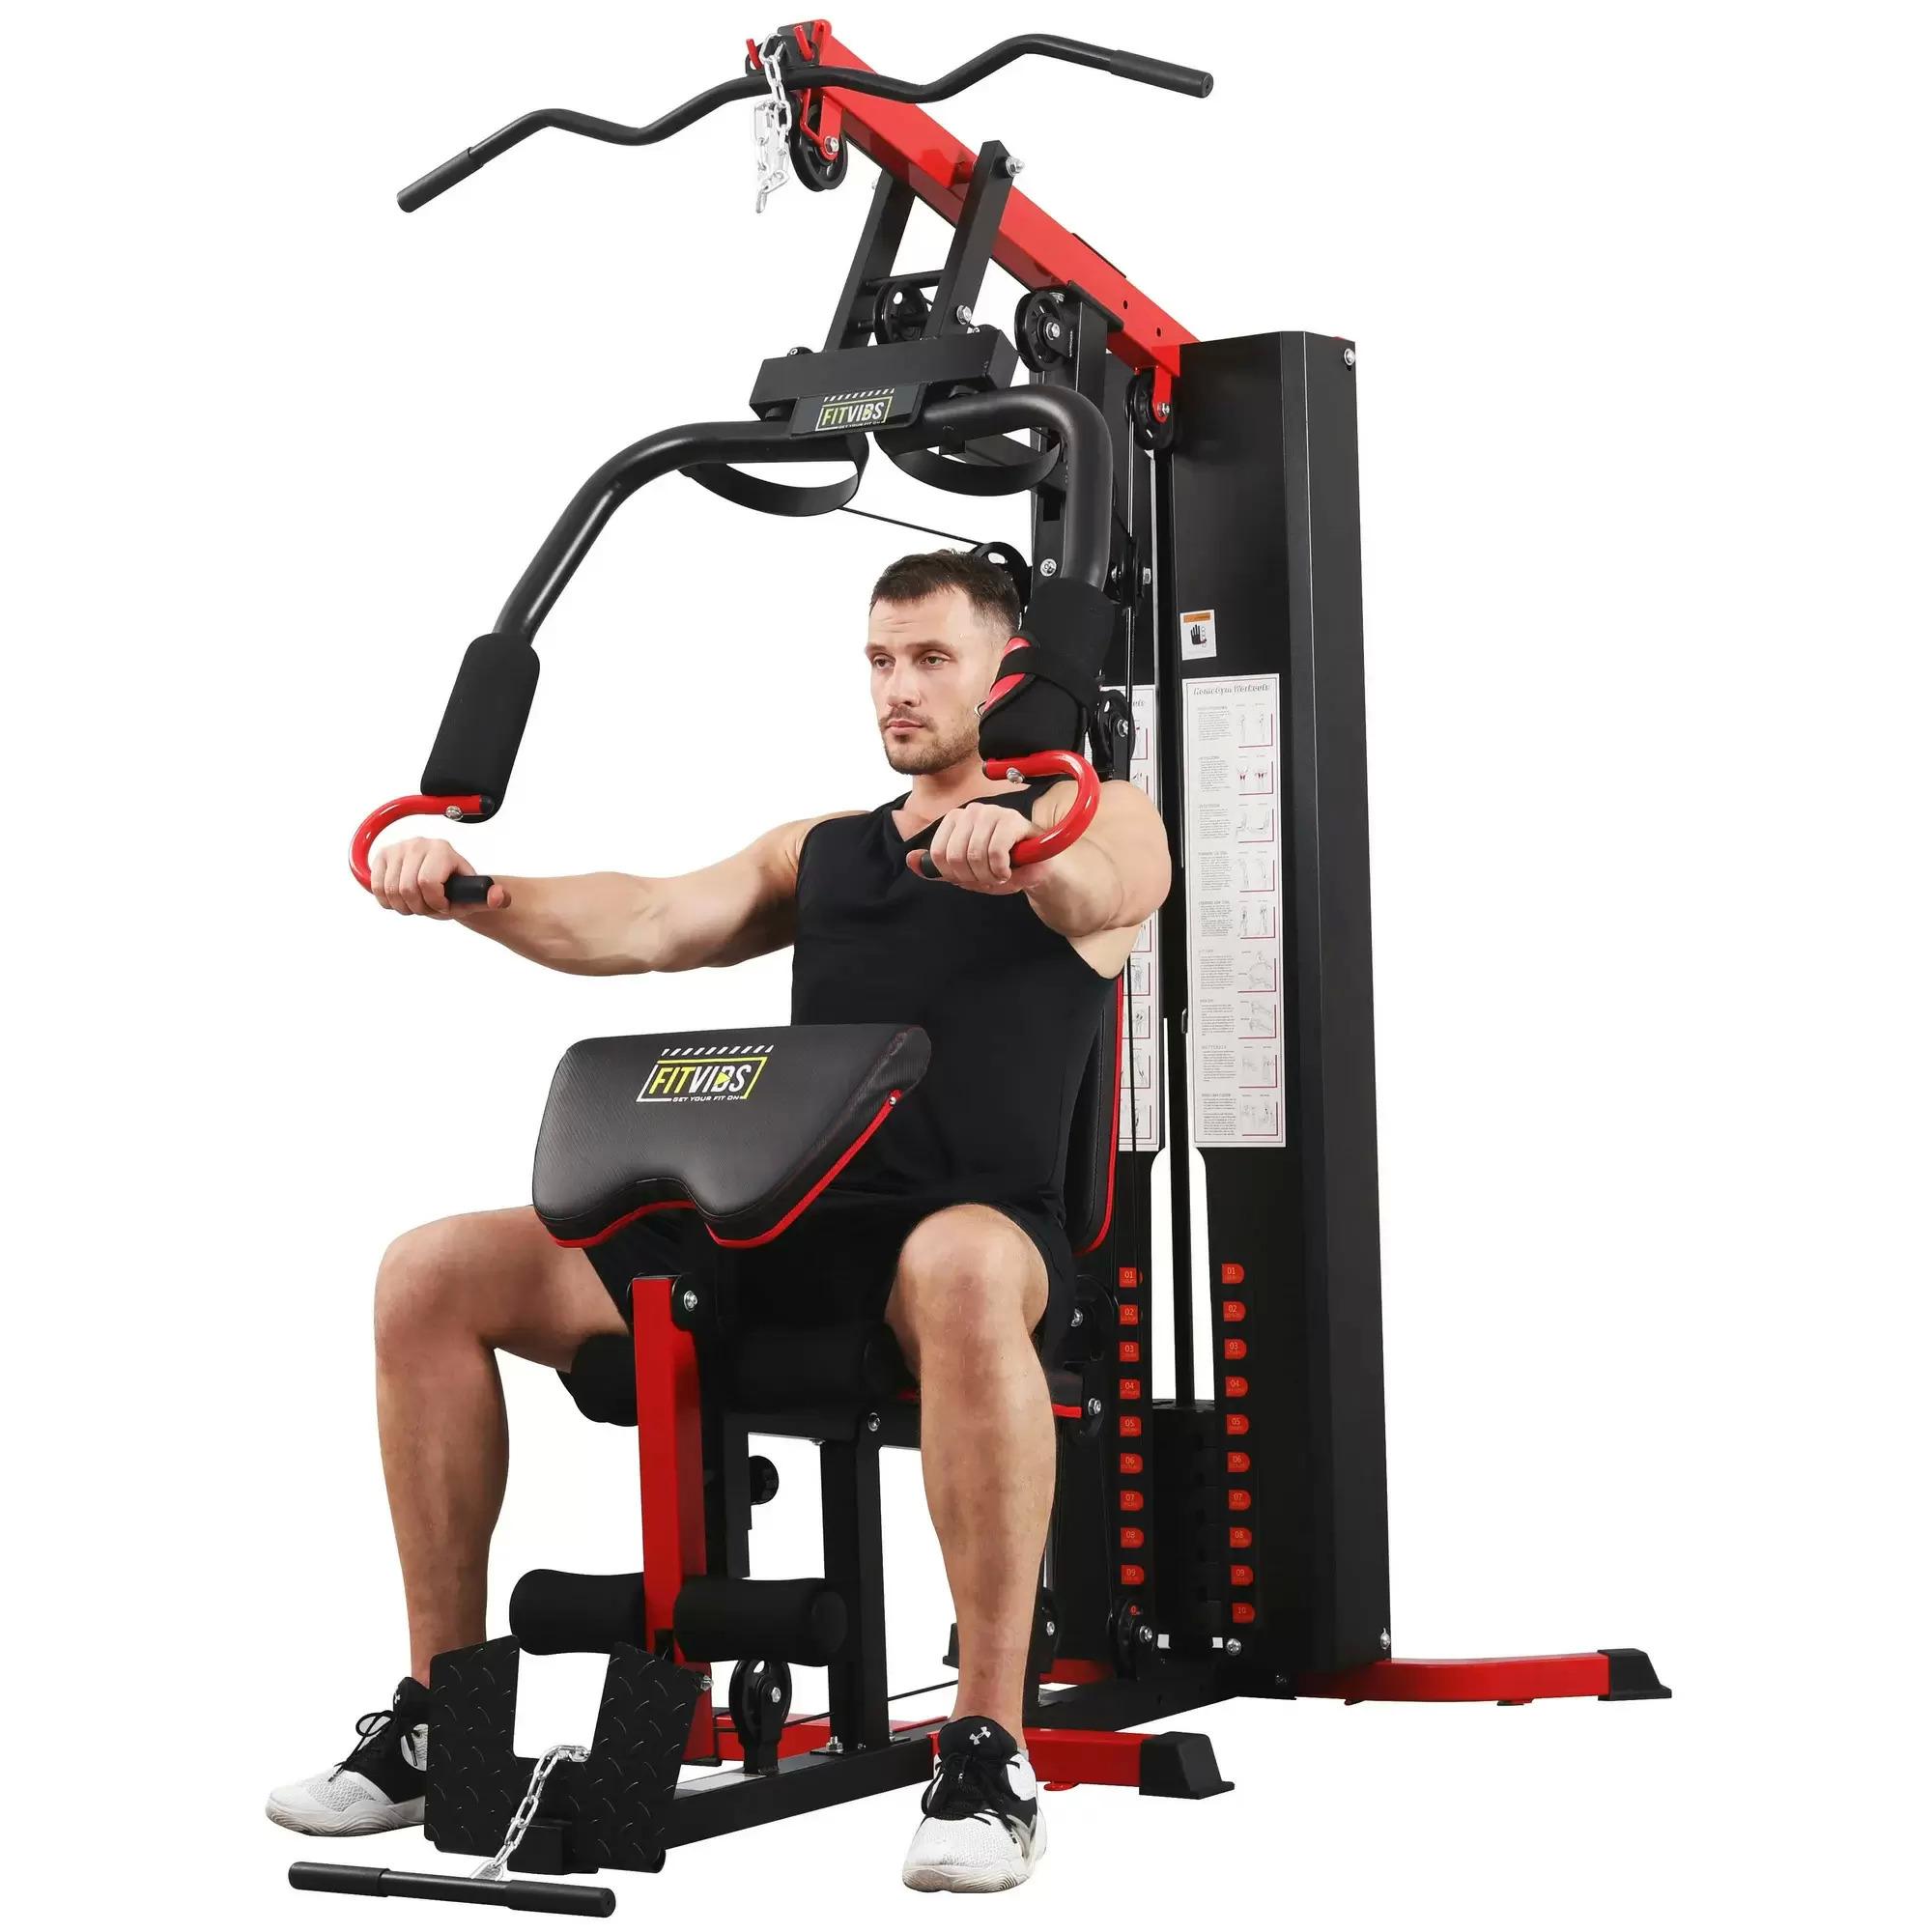 Fitvids LX750 Home Gym System Workout Station for $279.99 Shipped